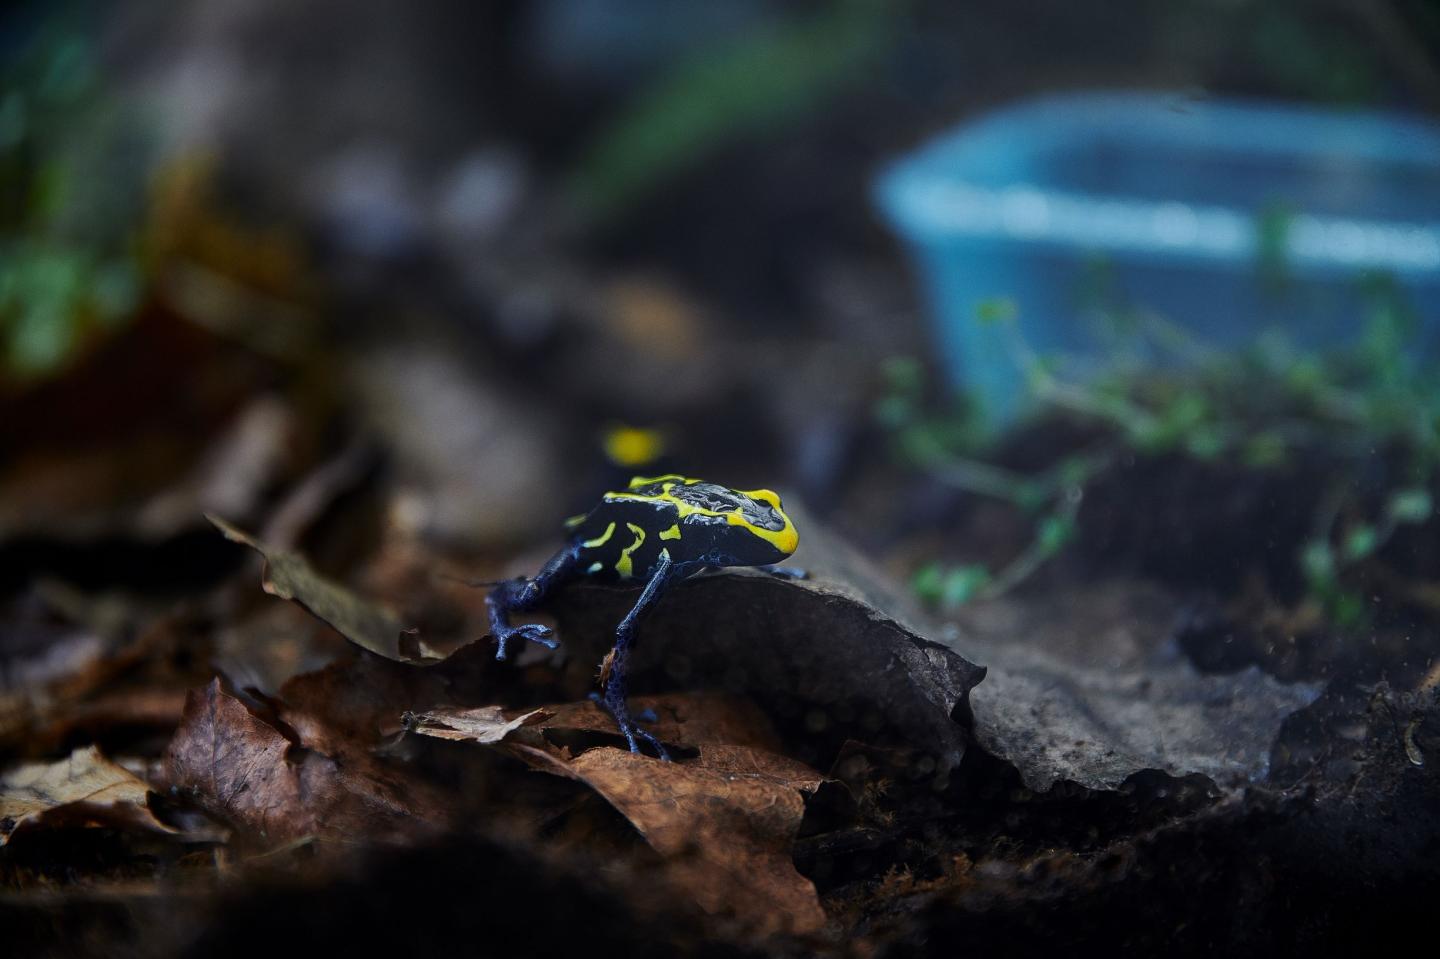 The Dyeing Poison Frog